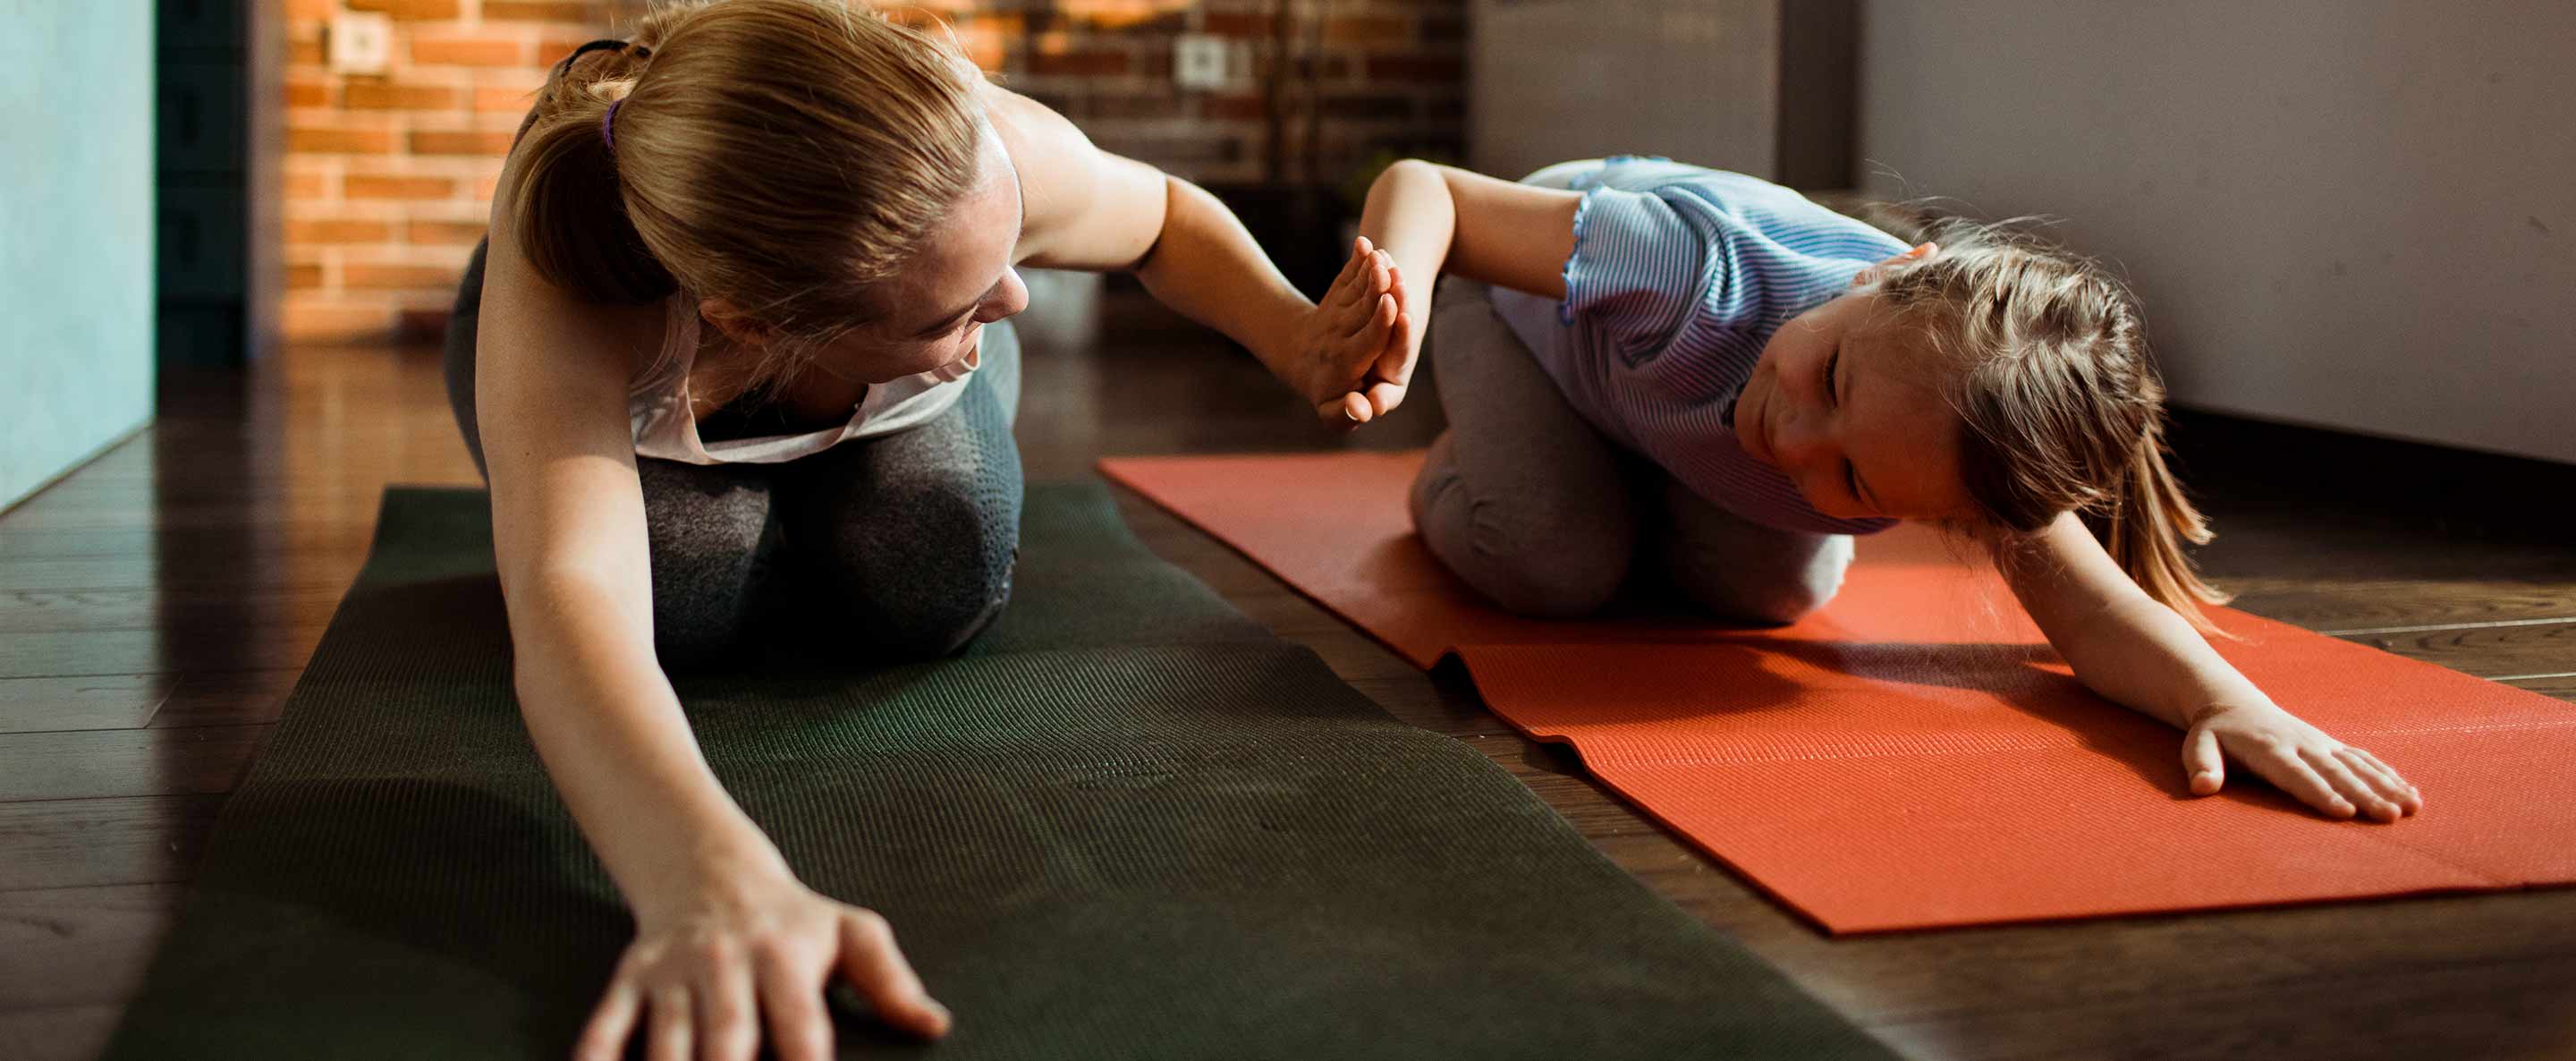 mother and daughter doing yoga together